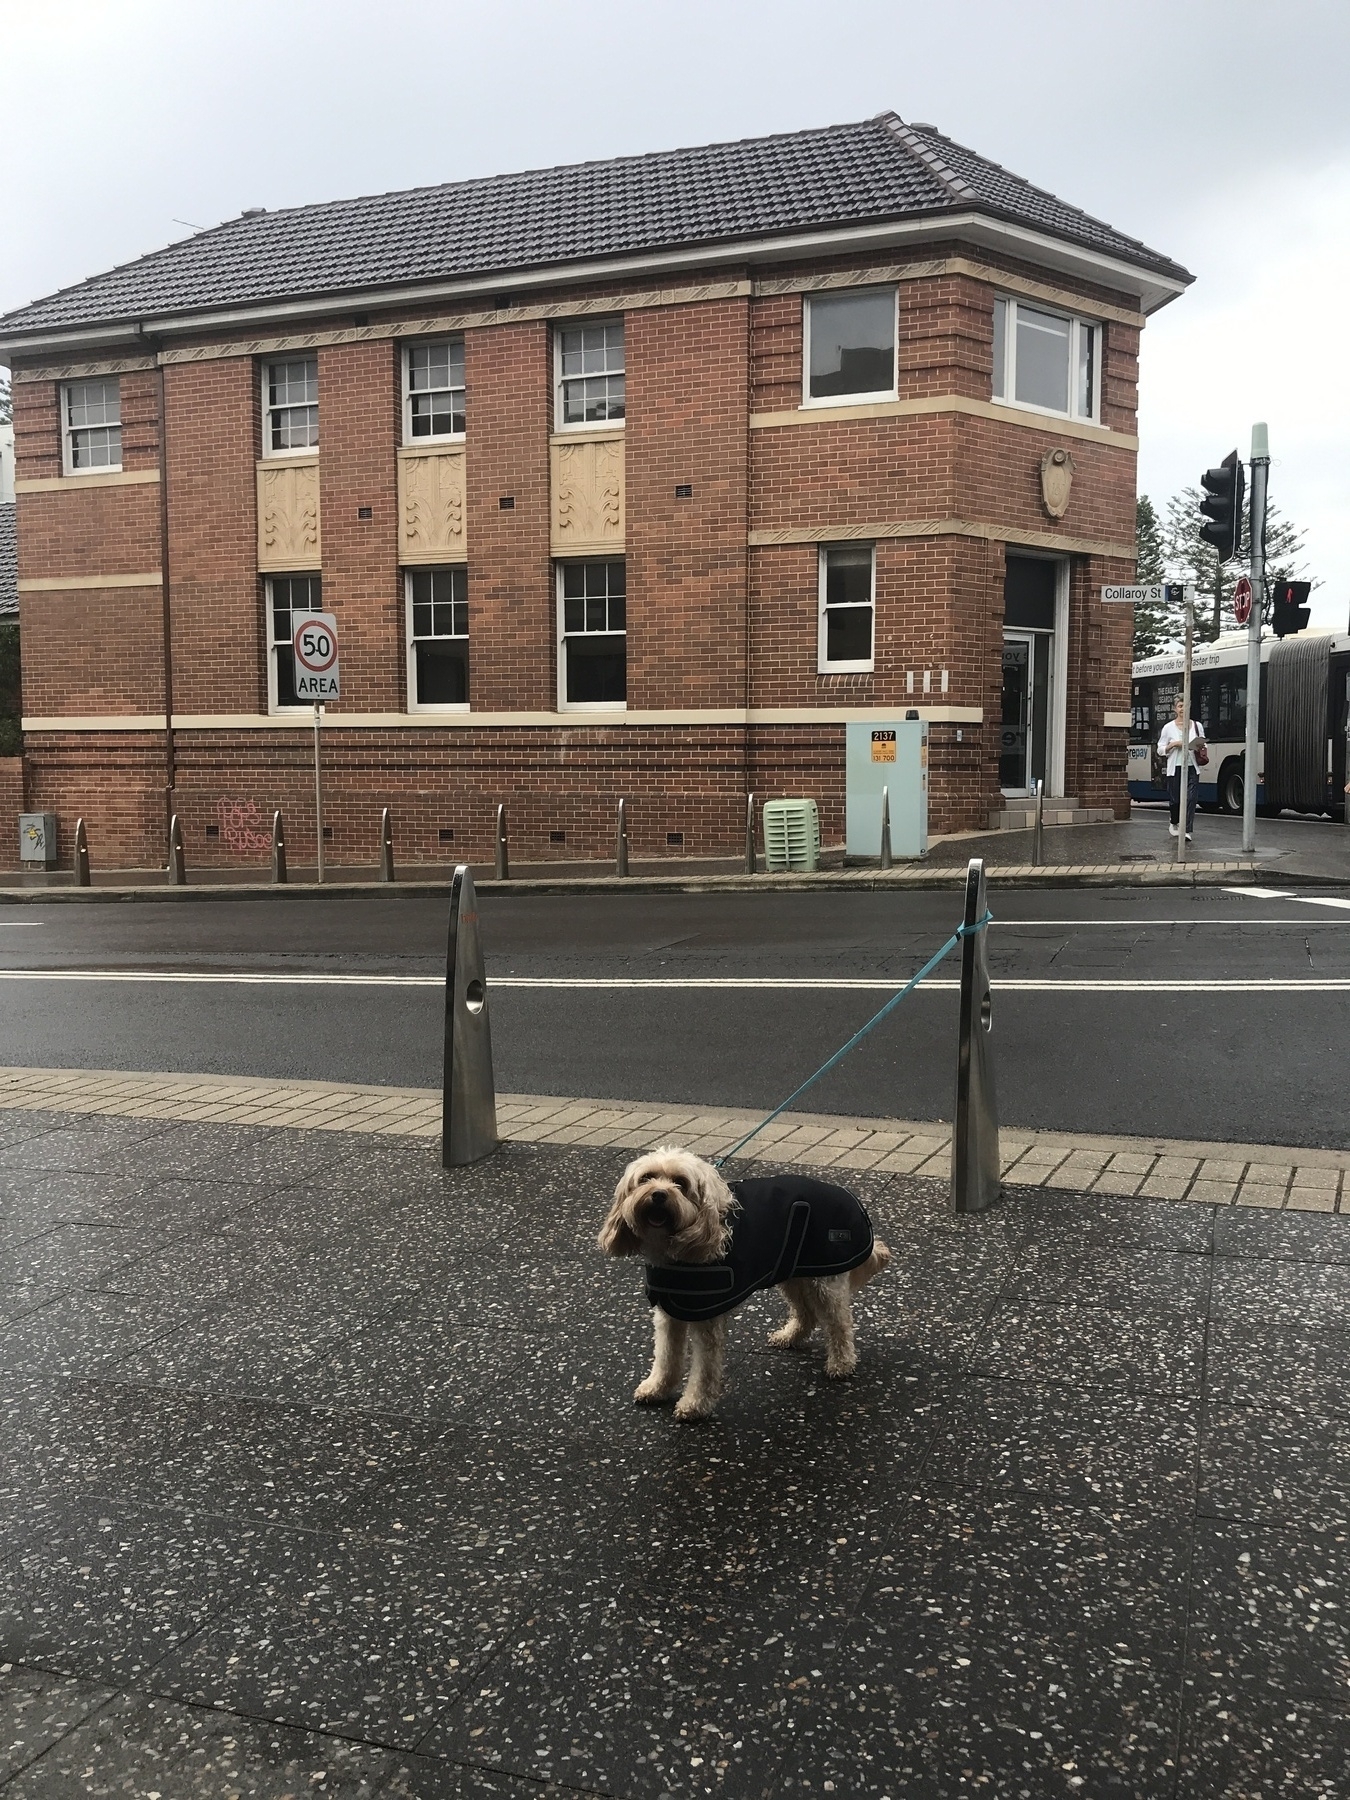 A street corner on a grey day with dreary light, and a big brick building across the road. On a speckled, dark footpath in the foreground, tied to a bicycle rack, is a little dog in a black coat over curly, light brown fur. He’s advanced as far as he can, with the lead at full stretch, and stands gazing forlornly towards the camera. His ears flop down at the sides.